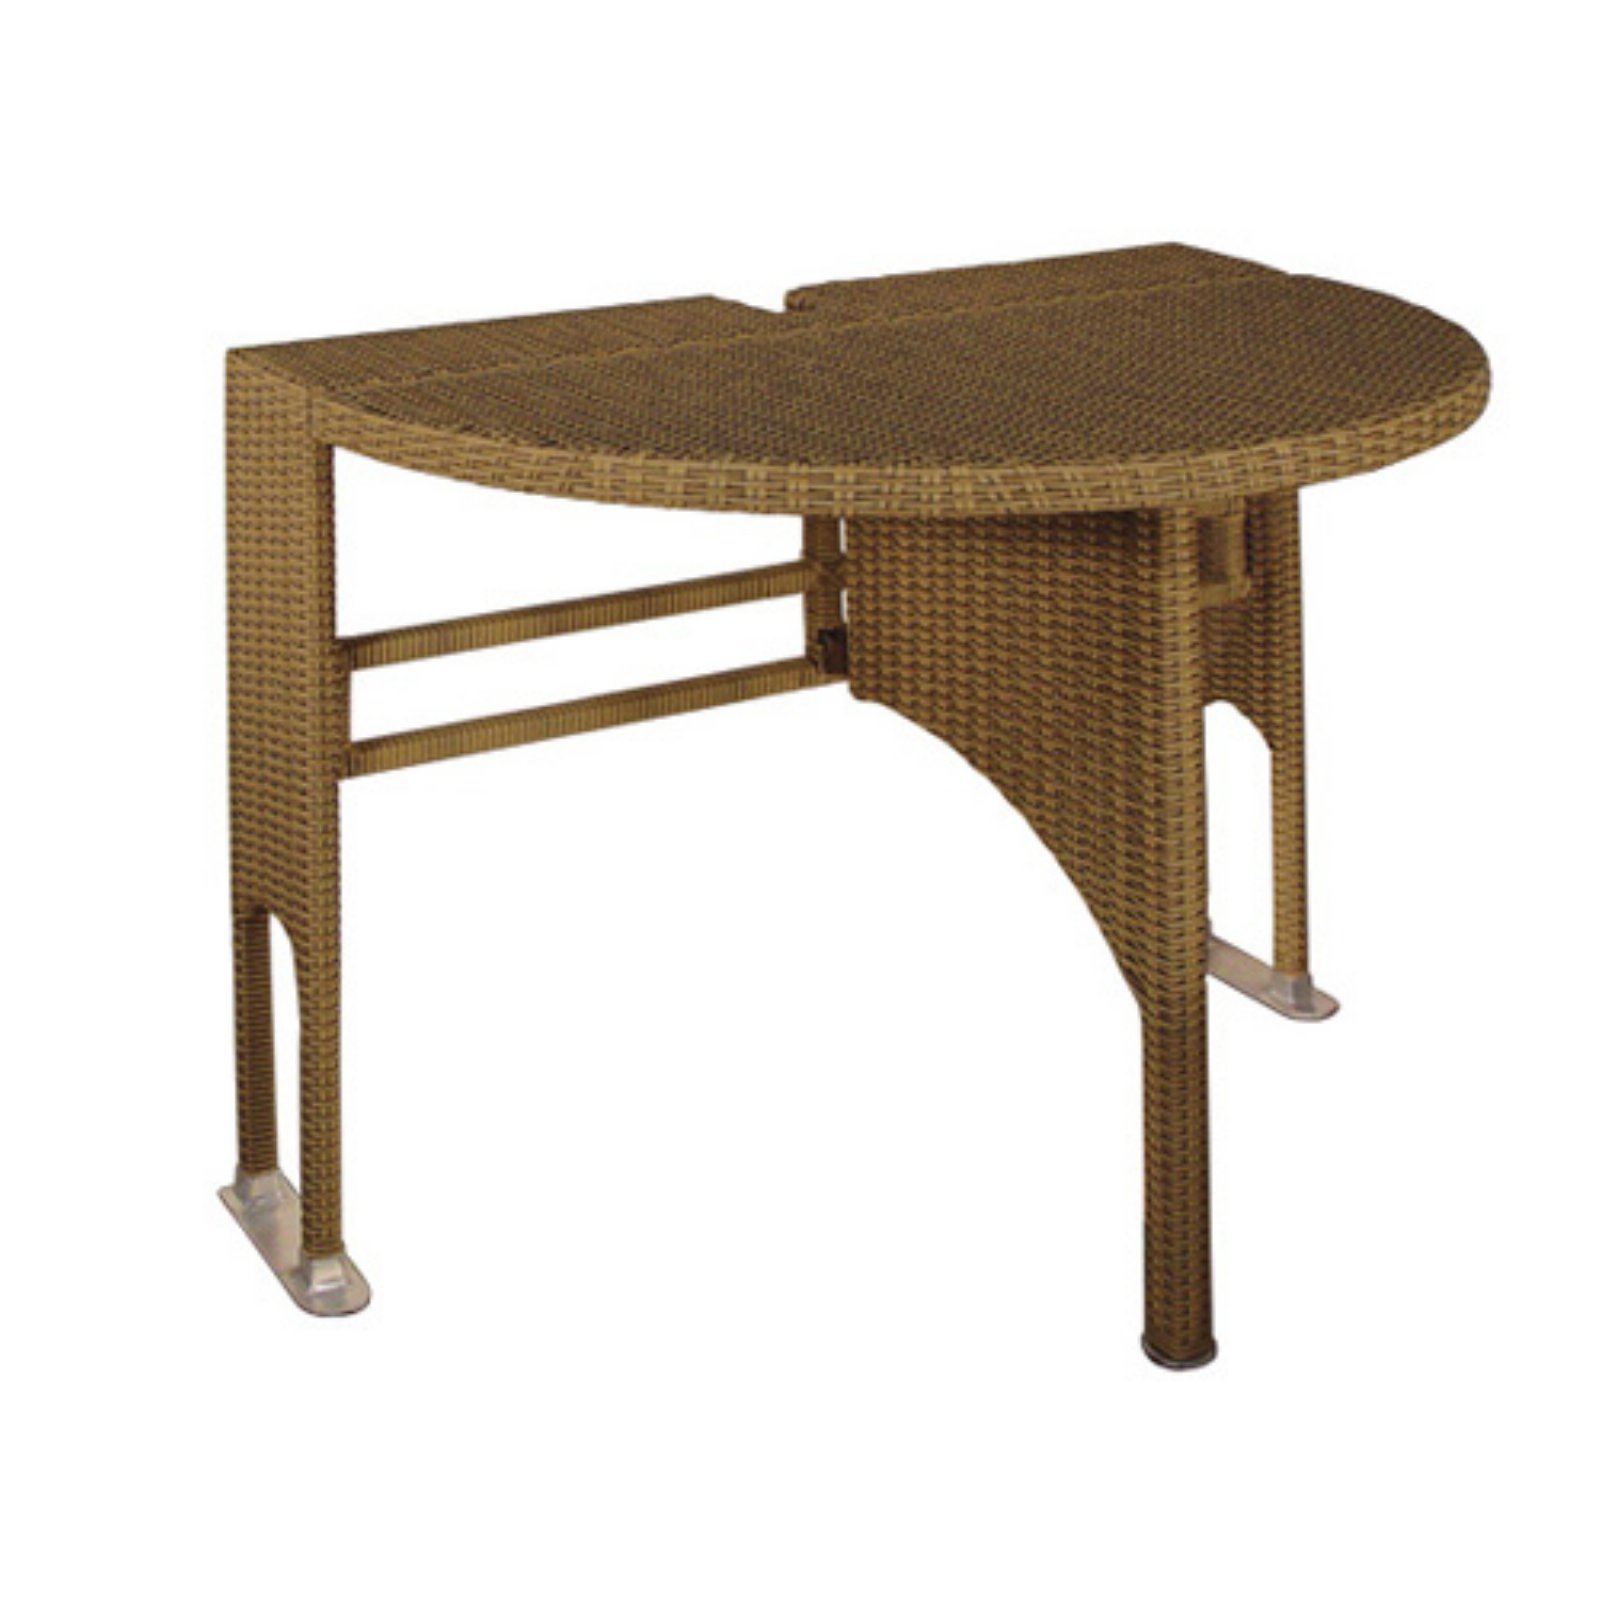 Blue Star Group Terrace Mates Adena All-Weather Wicker Coffee Color Table Set w/ 7.5'-Wide OFF-THE-WALL BRELLA - Green Olefin Canopy - image 3 of 9